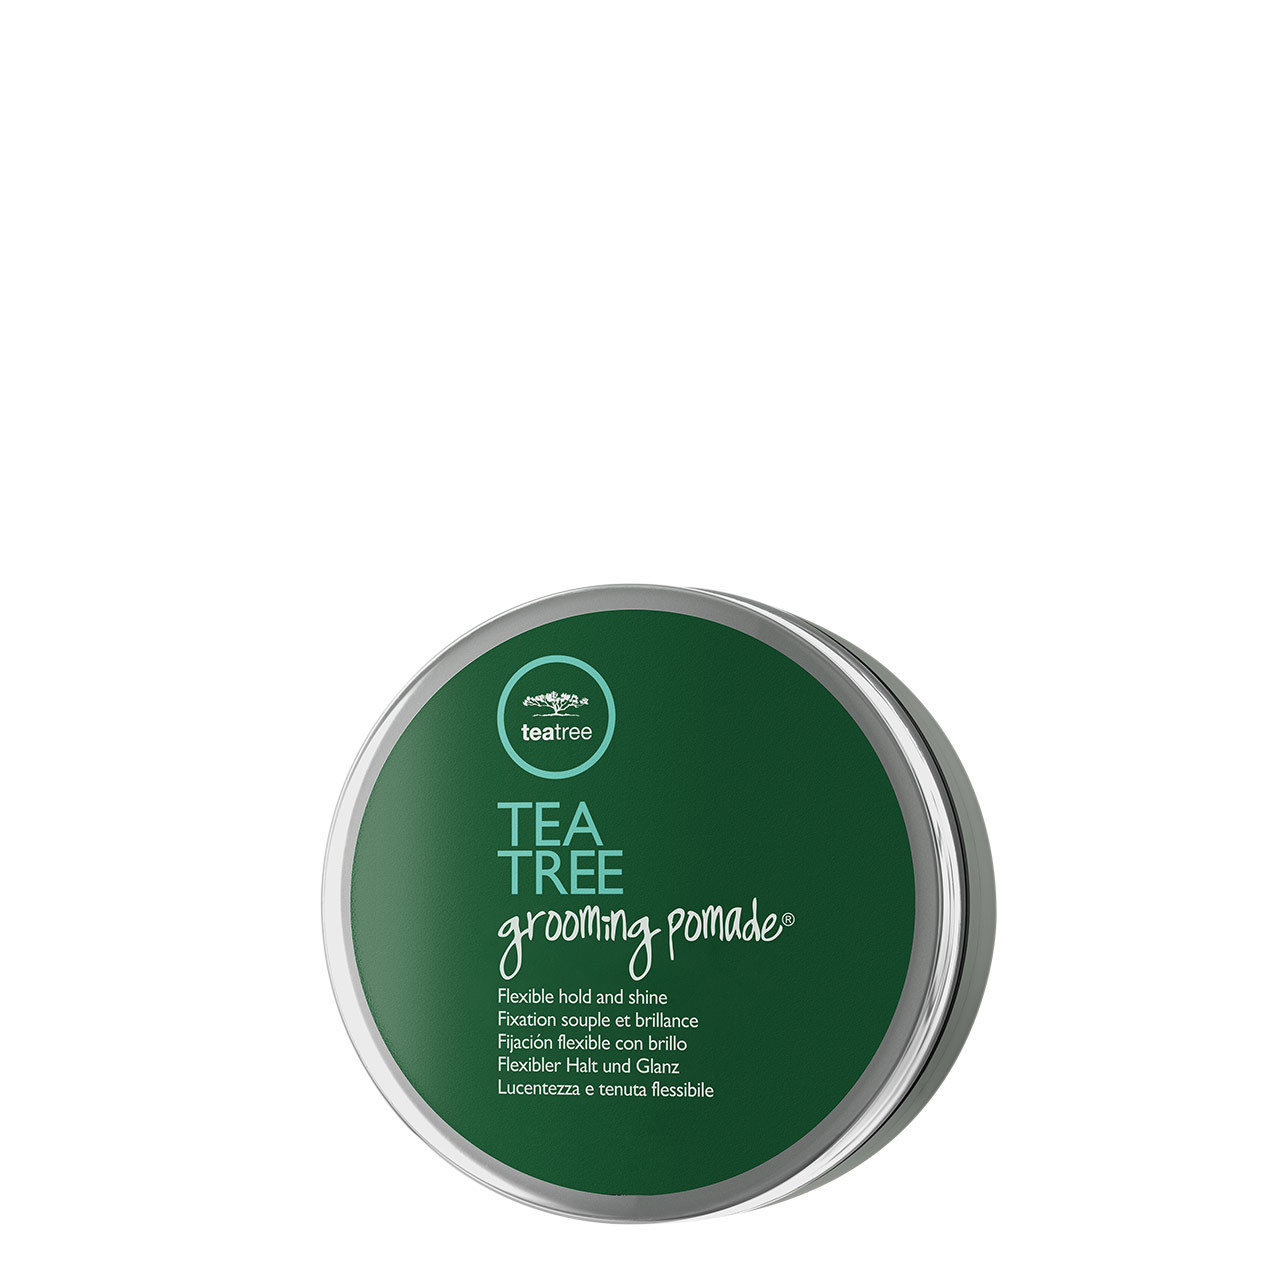 Tea Tree Grooming Pomade by Paul Mitchell